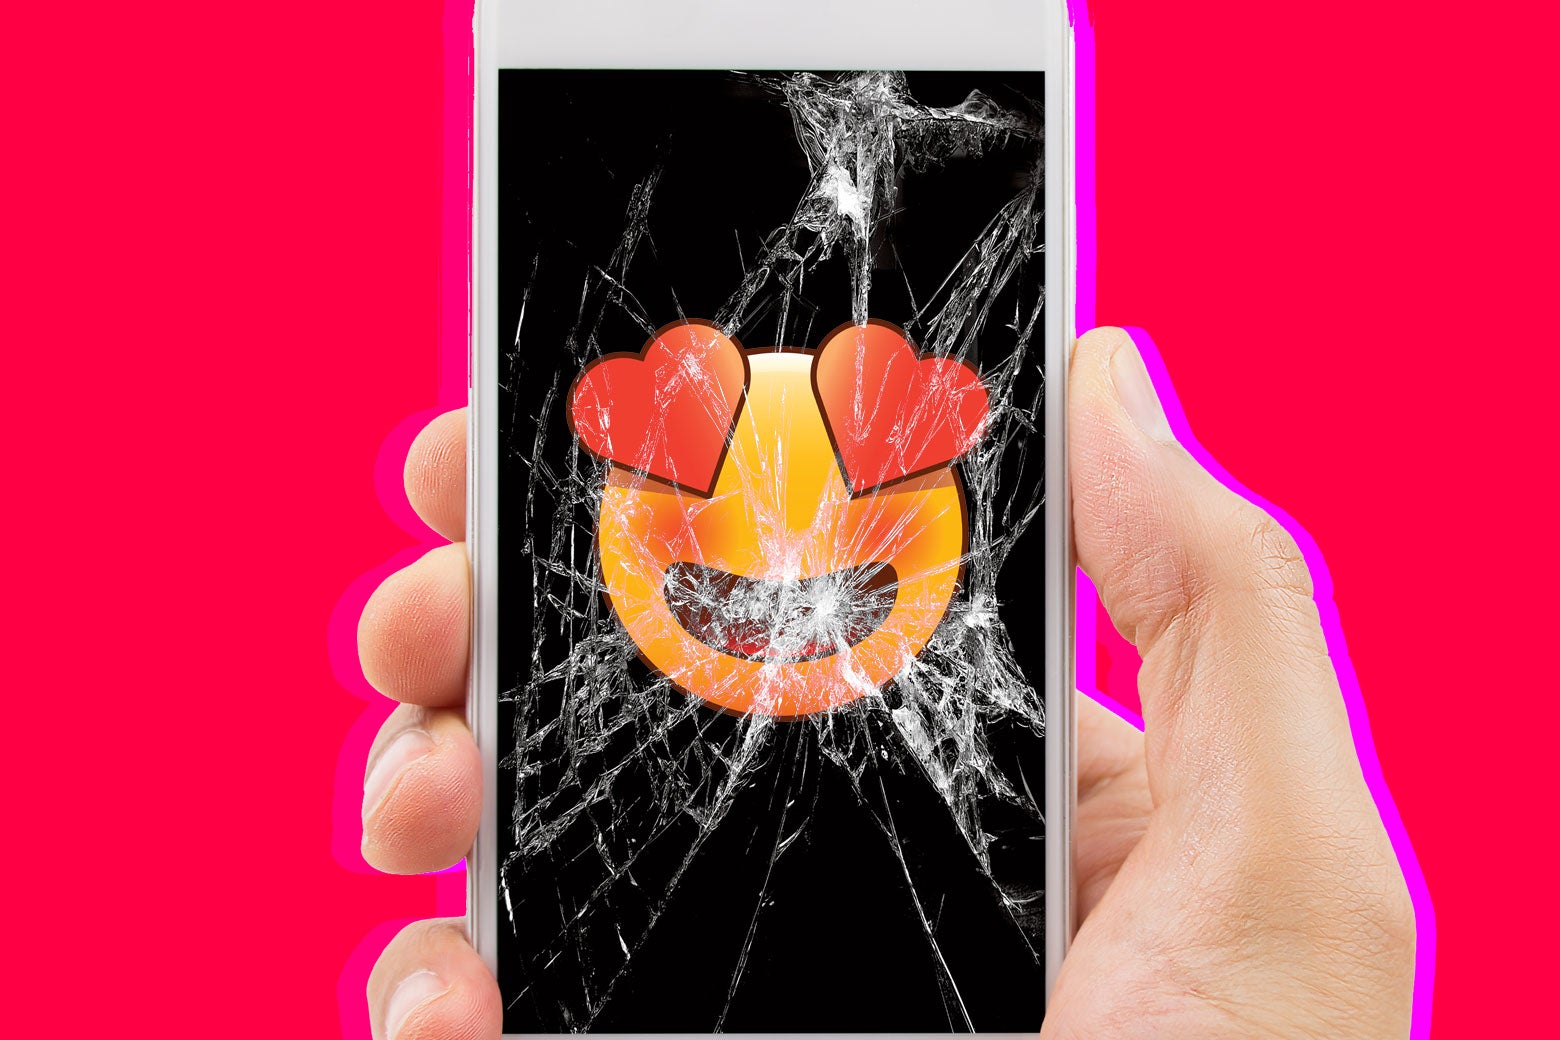 Photo illustration: A heart-eyes emoji is shown on the screen of a severely cracked phone in someone’s hand.